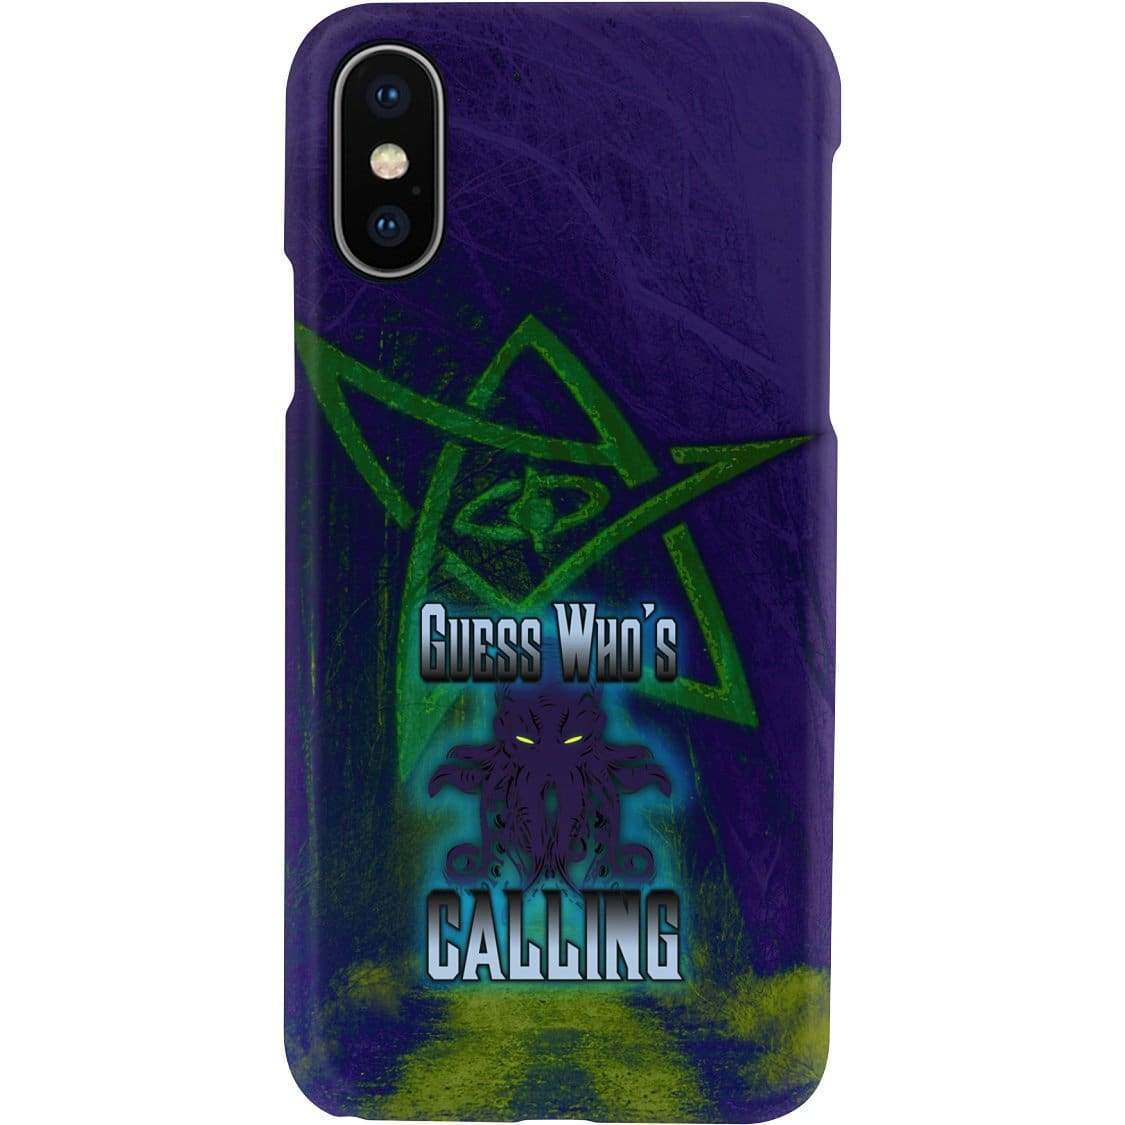 Cthulhu - Guess Who’s Calling Phone Case - Snap * iPhone * Samsung * - iPhone XS Case / Gloss / Apparel